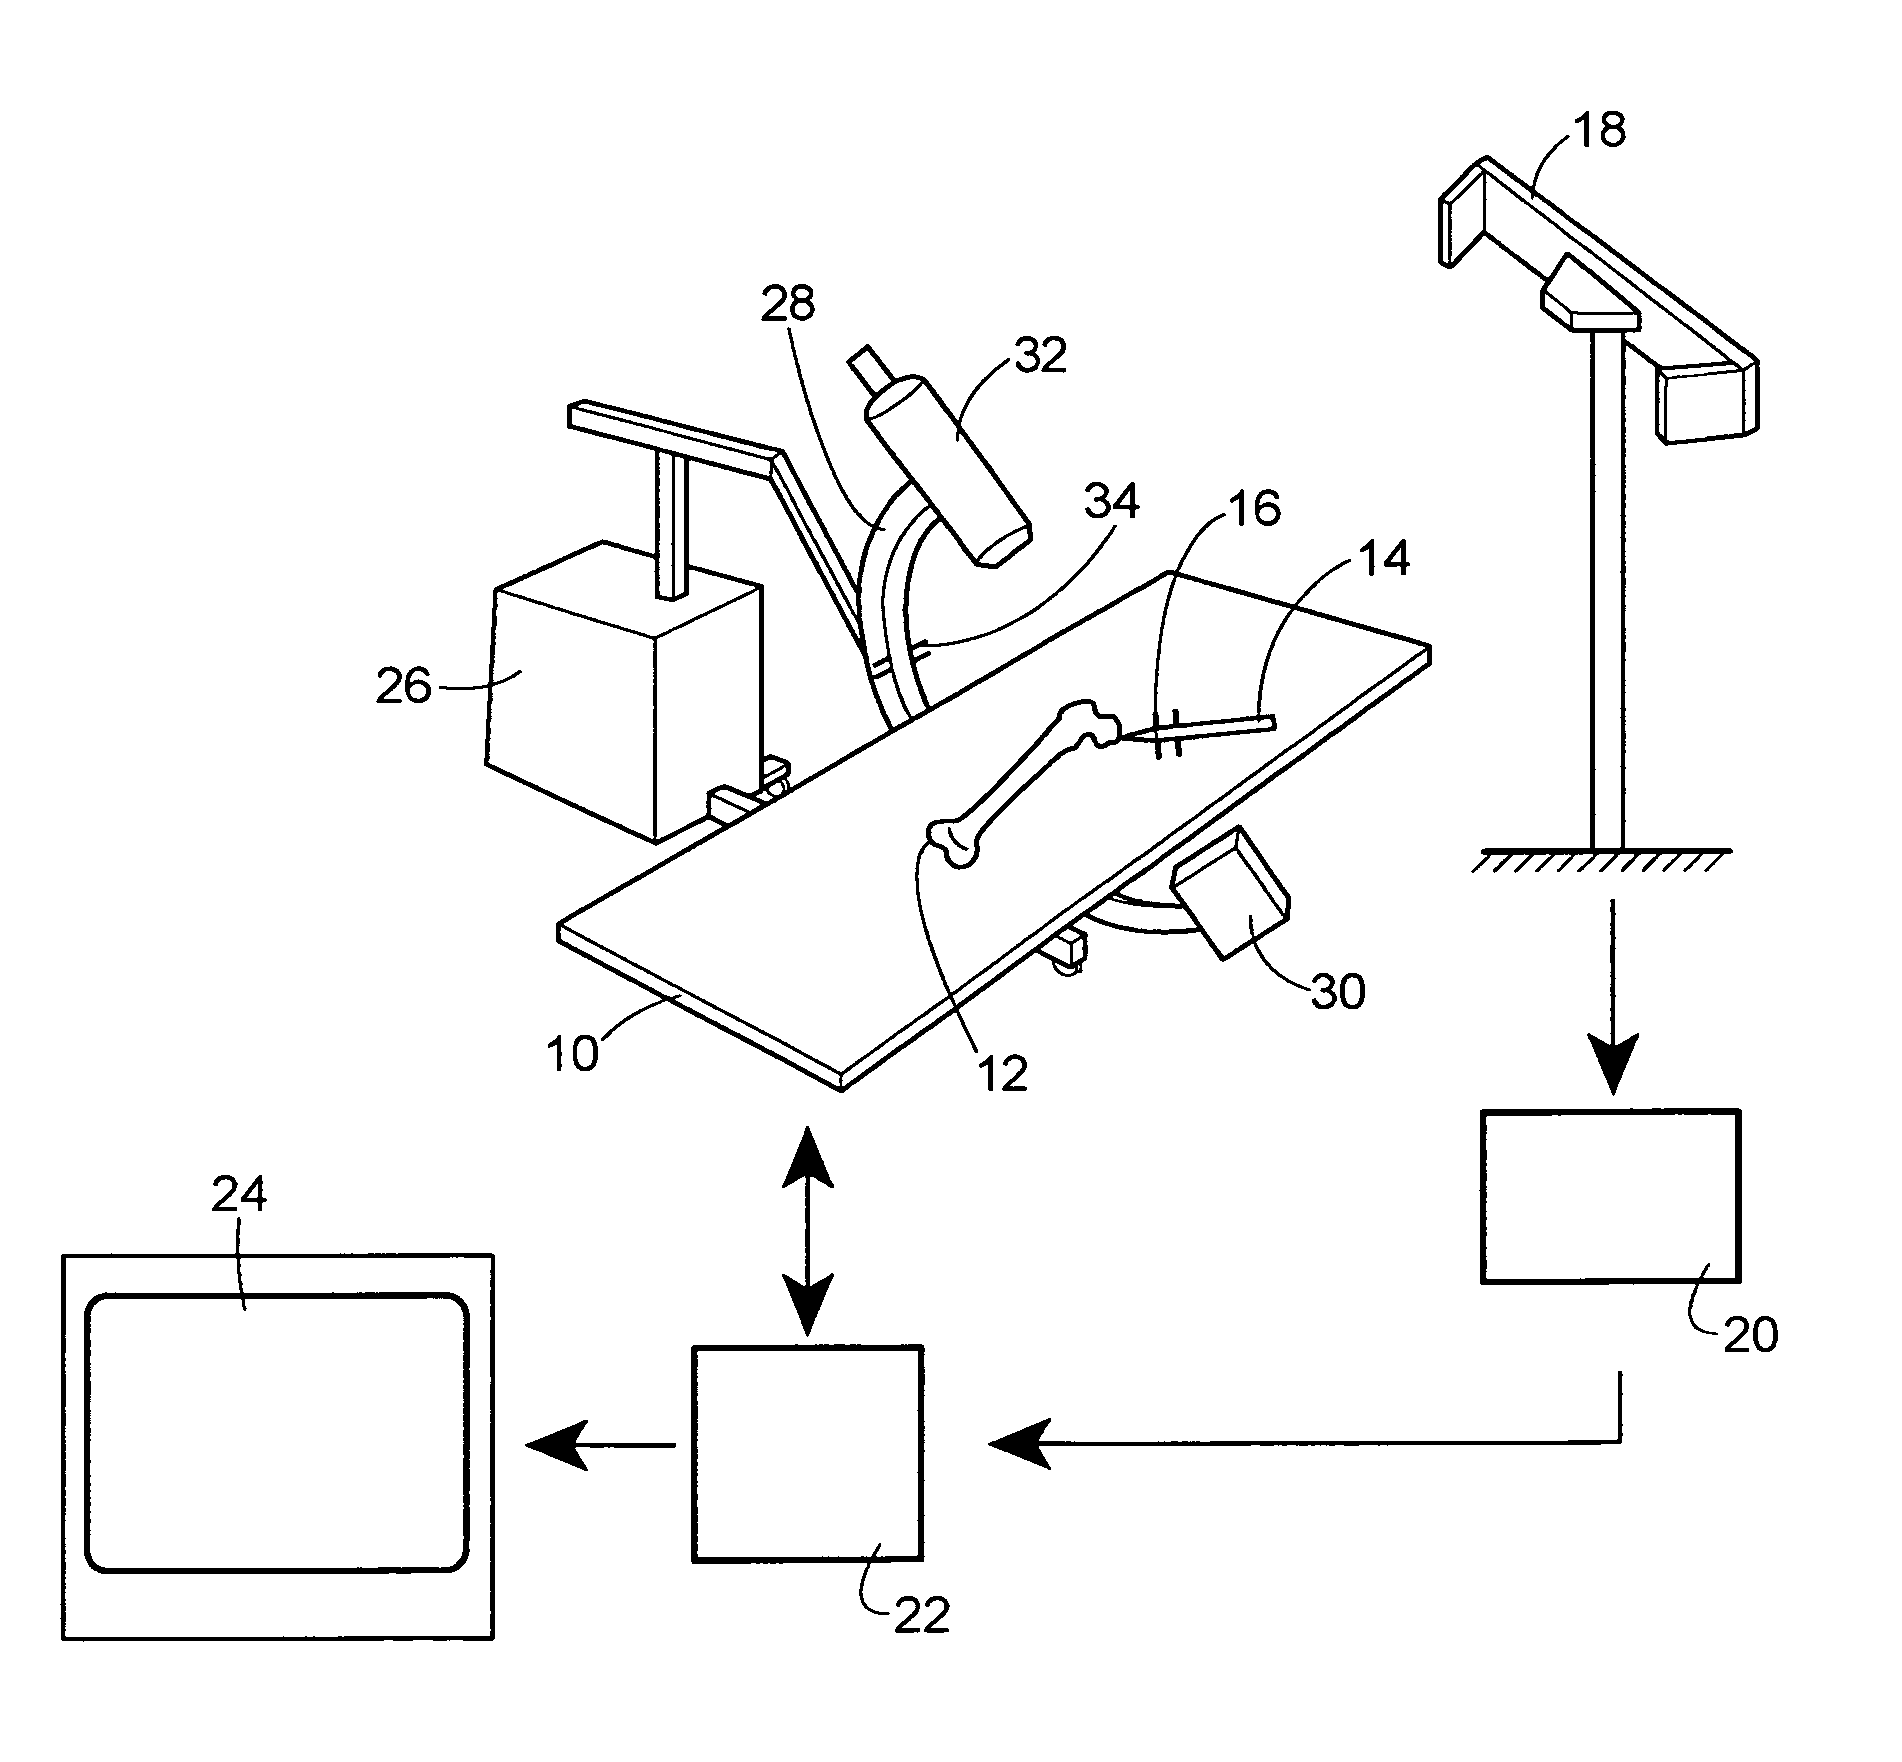 Method for navigating in the interior of the body using three-dimensionally visualized structures